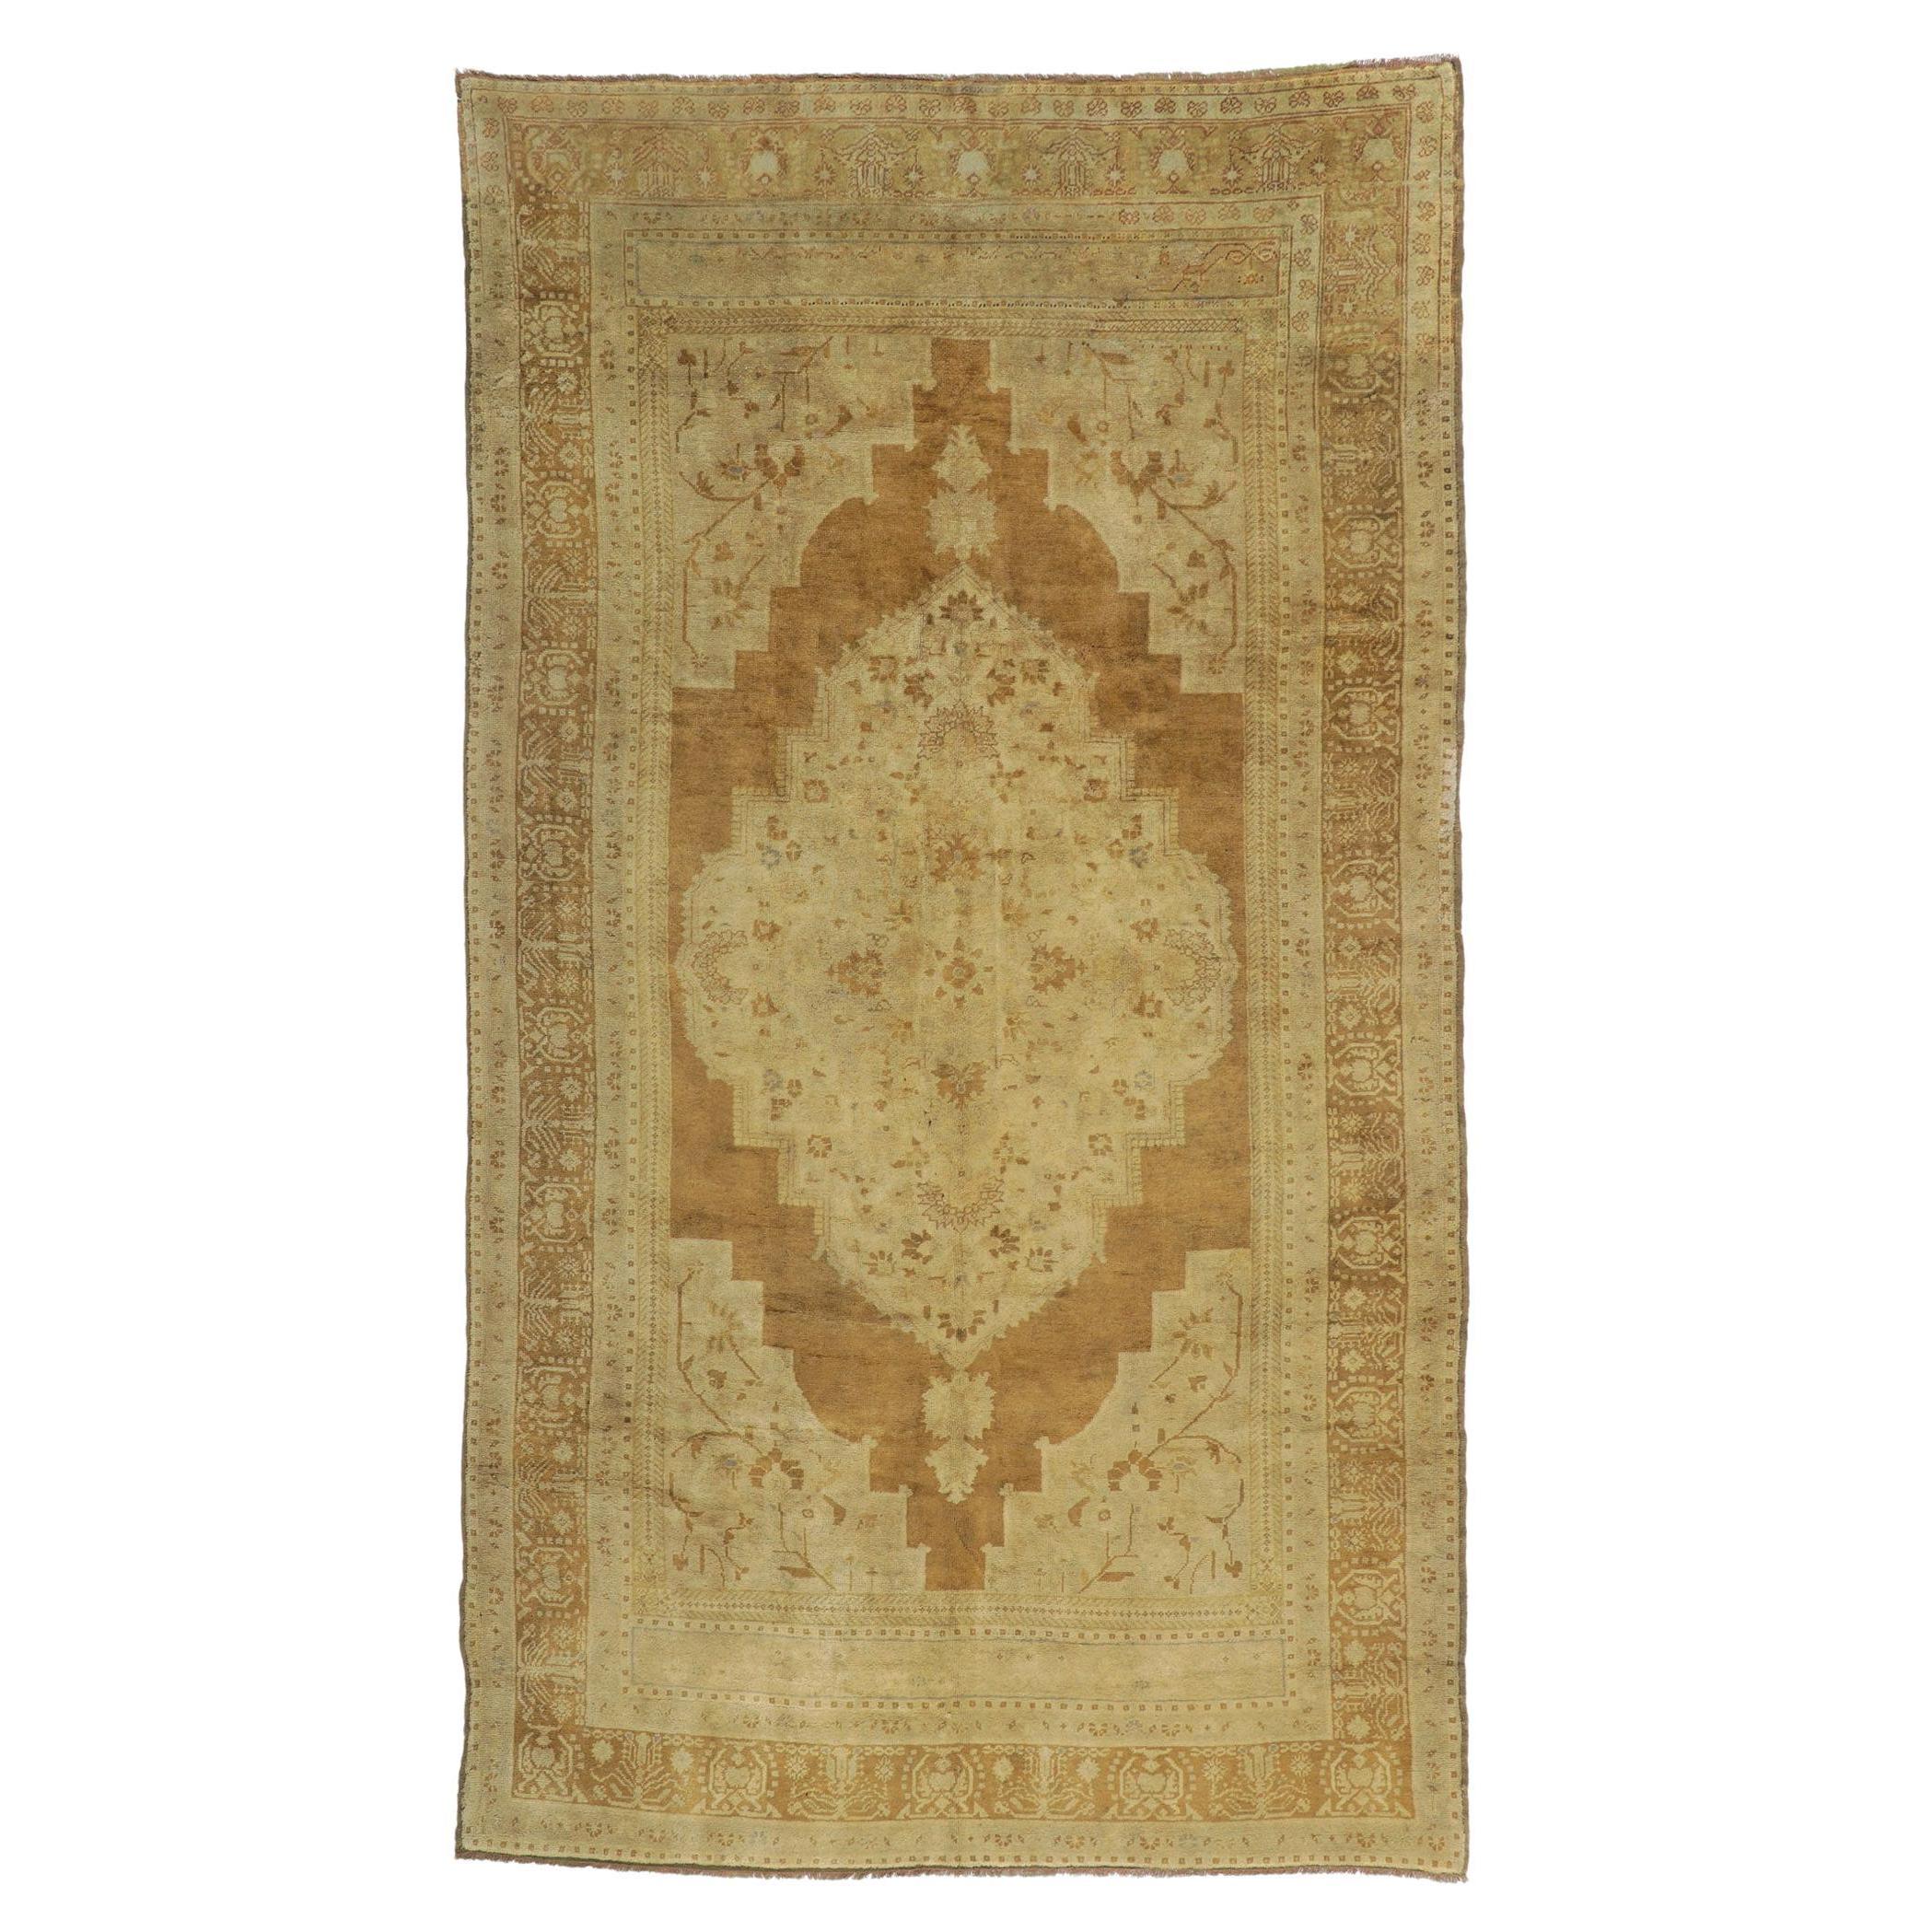 Vintage Turkish Oushak Rug Runner with Warm Earth-Tone Colors